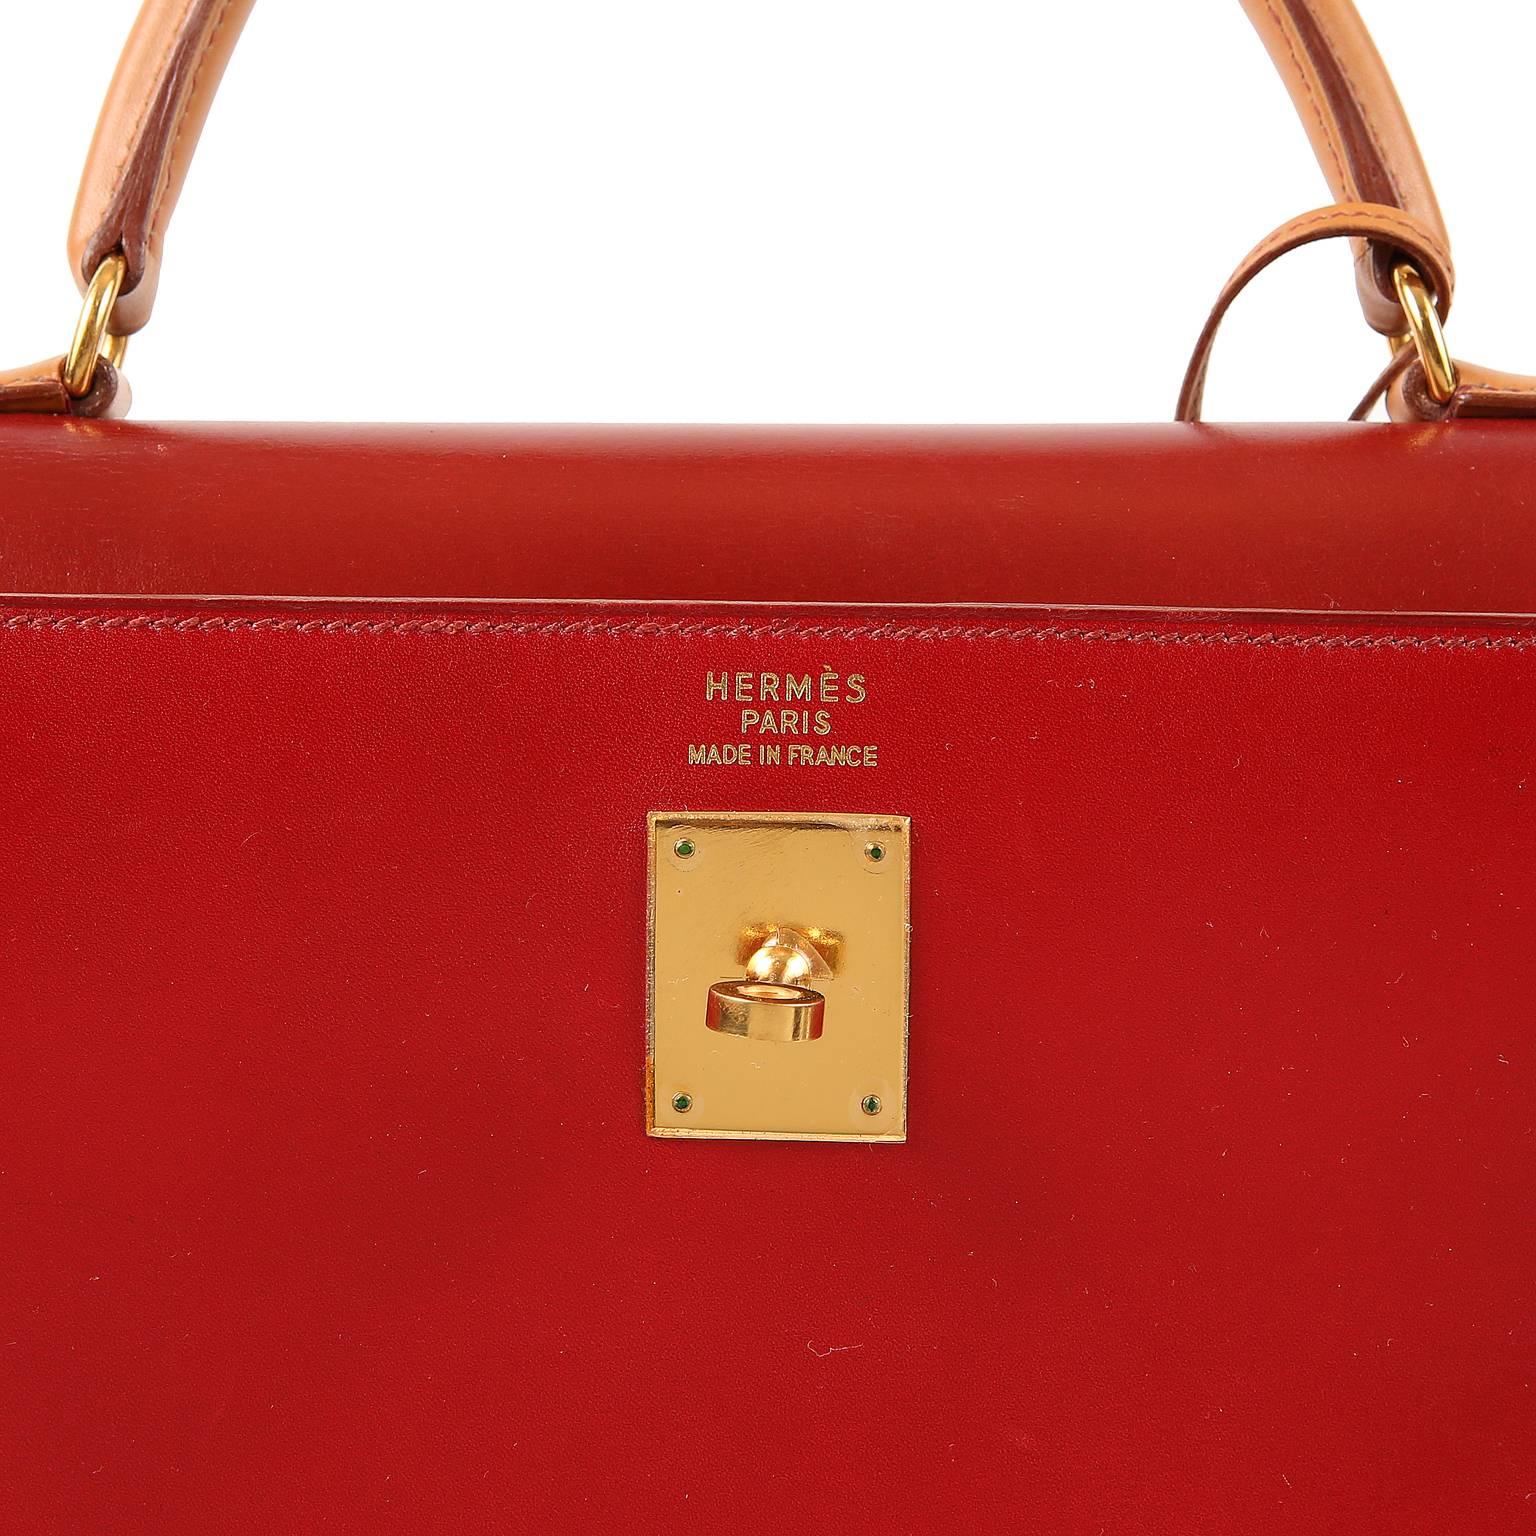 Hermès Tri Color Box Calf 35 cm Kelly Sellier- Red, Rouge H, Gold 2